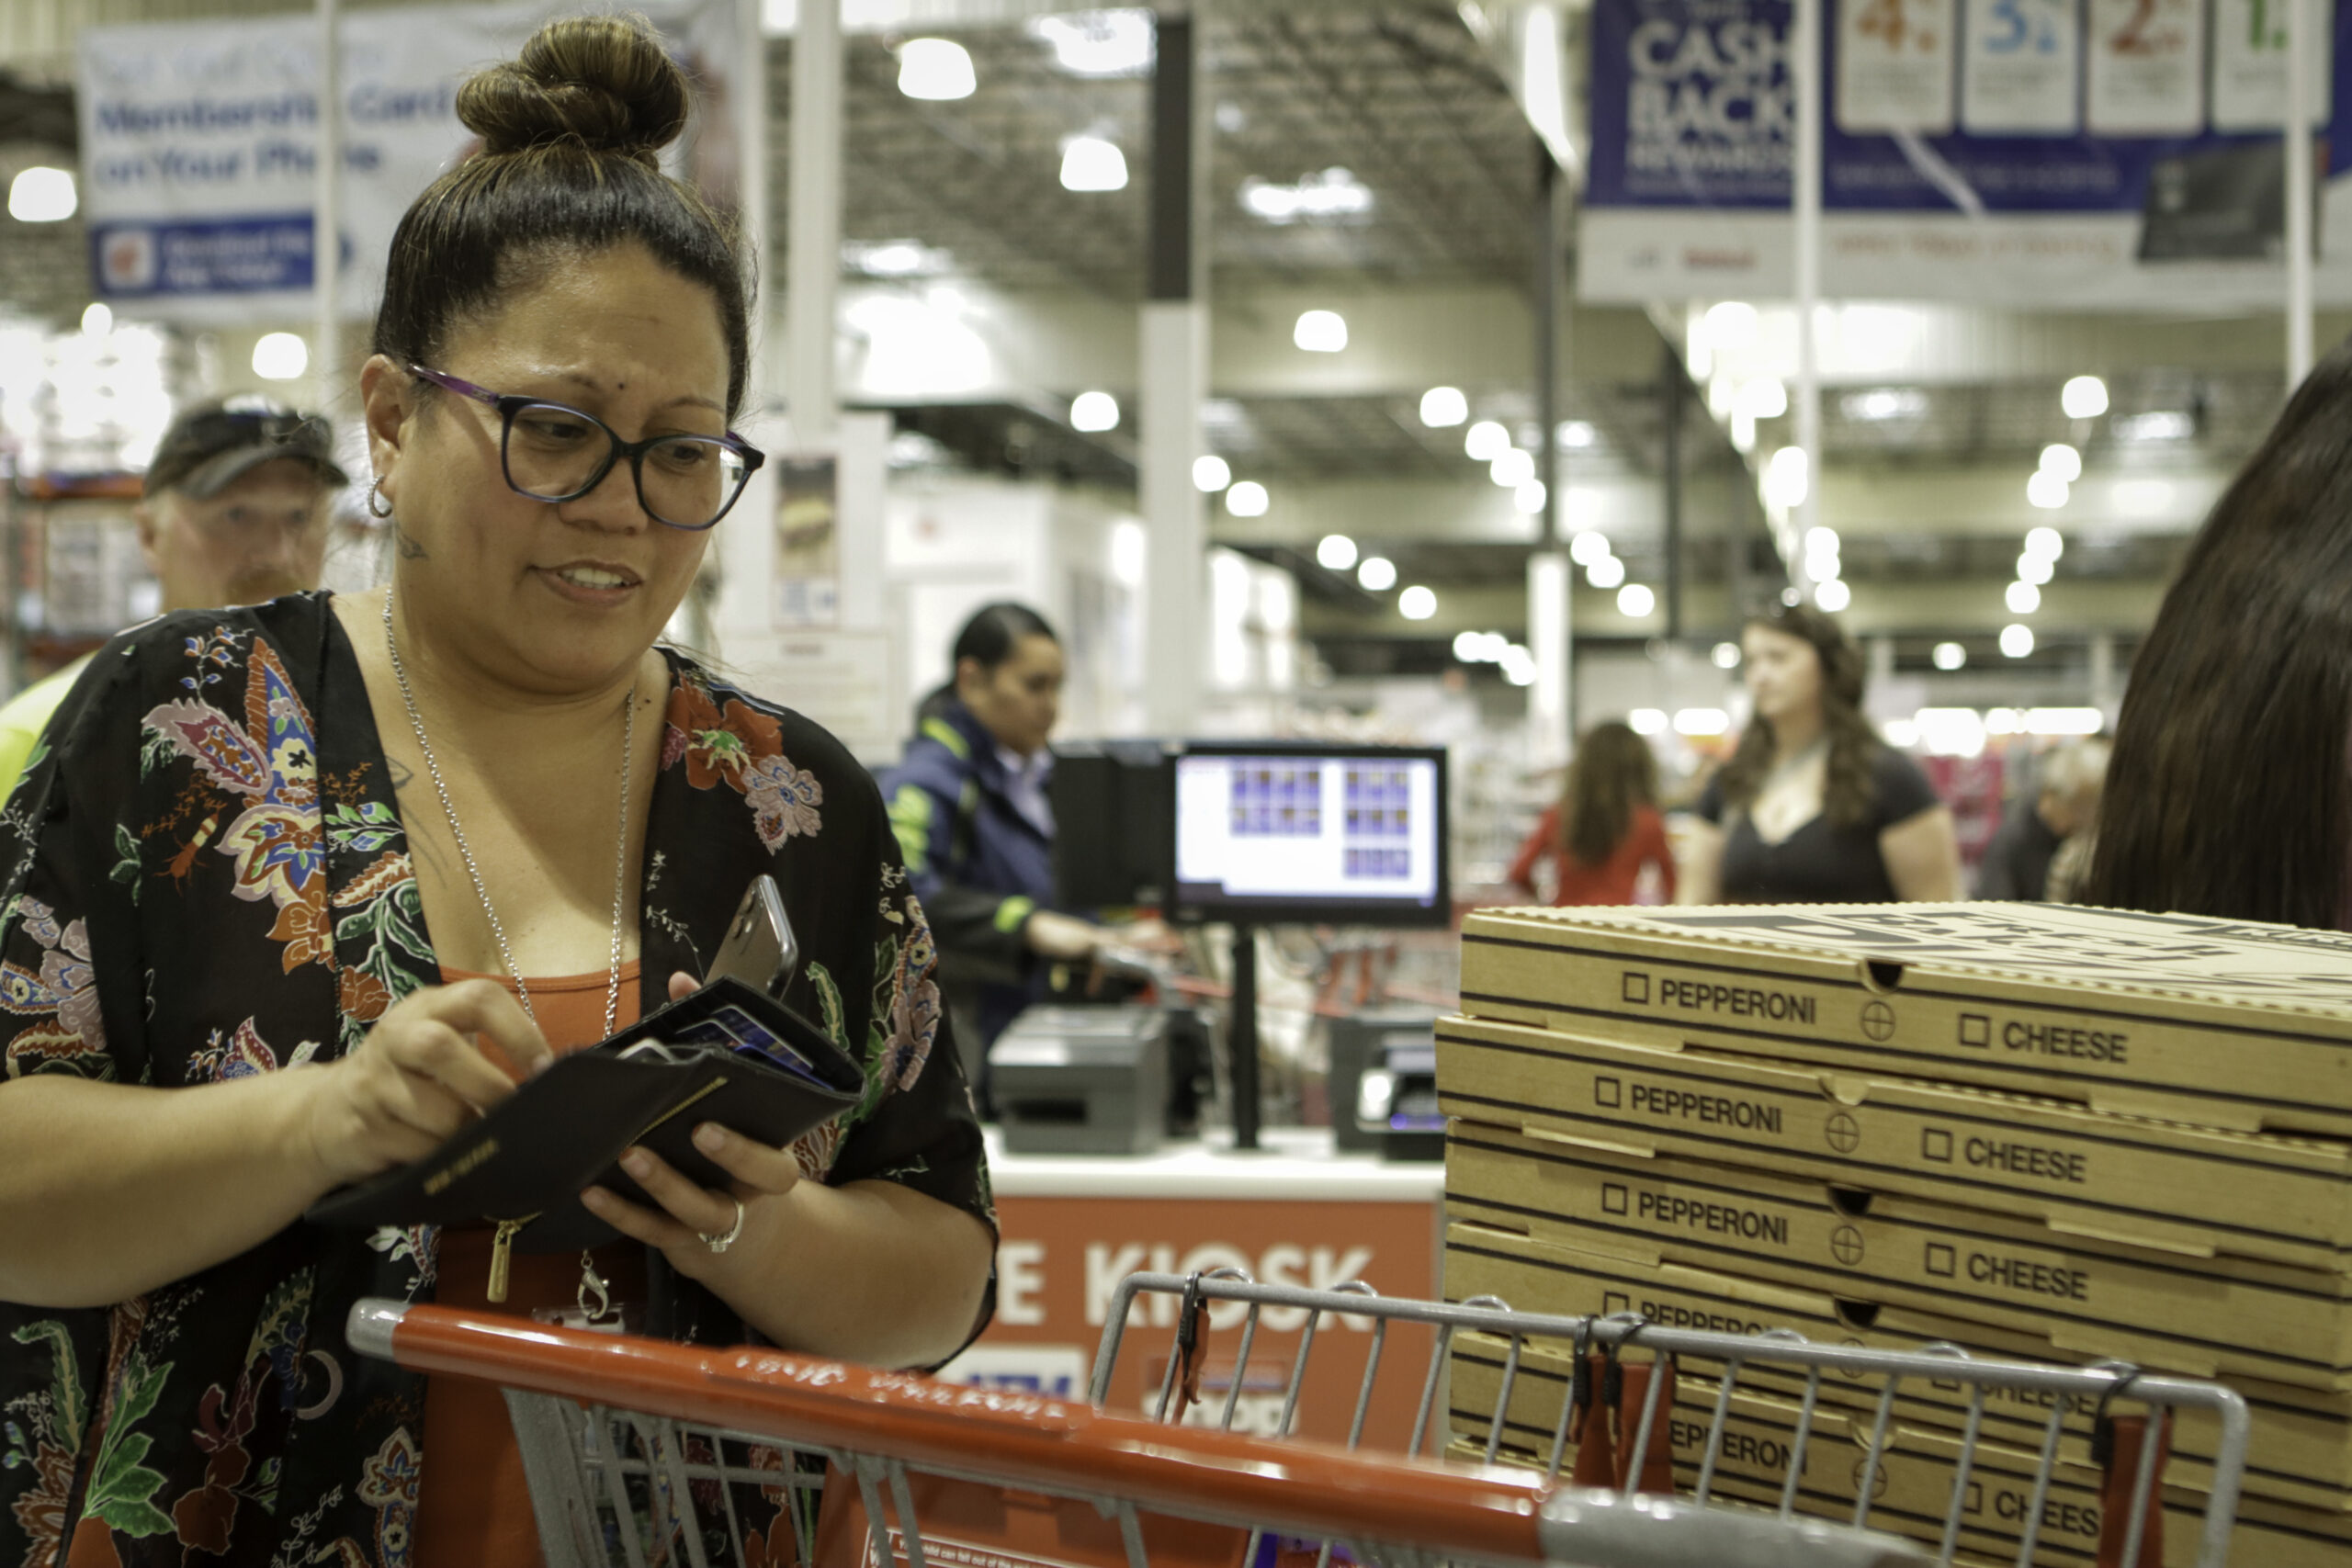 A woman is holding her wallet with a cart of pizzas at a Costco checkout line